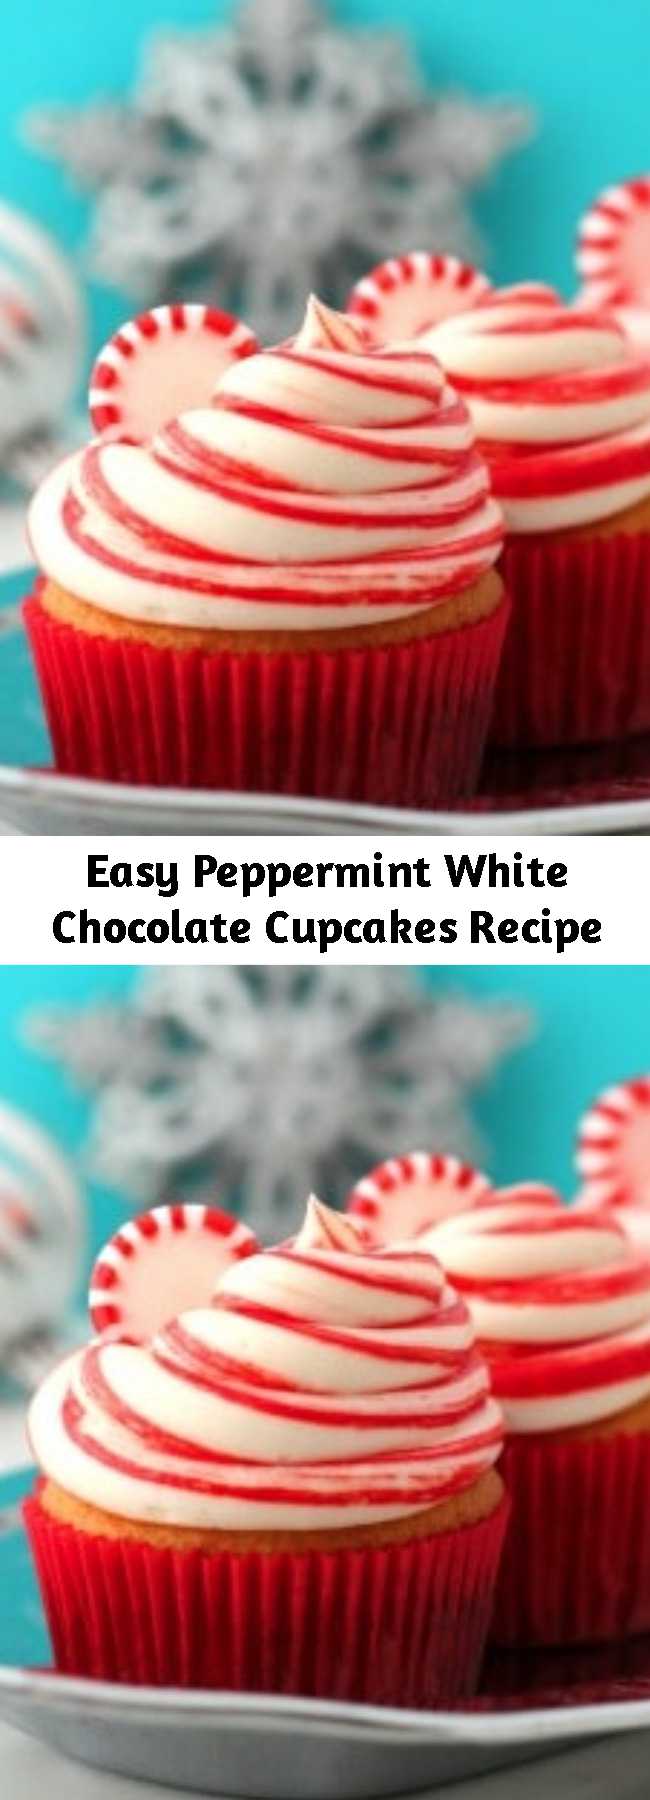 Easy Peppermint White Chocolate Cupcakes Recipe - Made with a base of boxed cake mix (and added melted white chocolate), these Peppermint White Chocolate Cupcakes are super easy to create! The peppermint frosting has red food coloring stripes to make them look like candy canes - so cute!